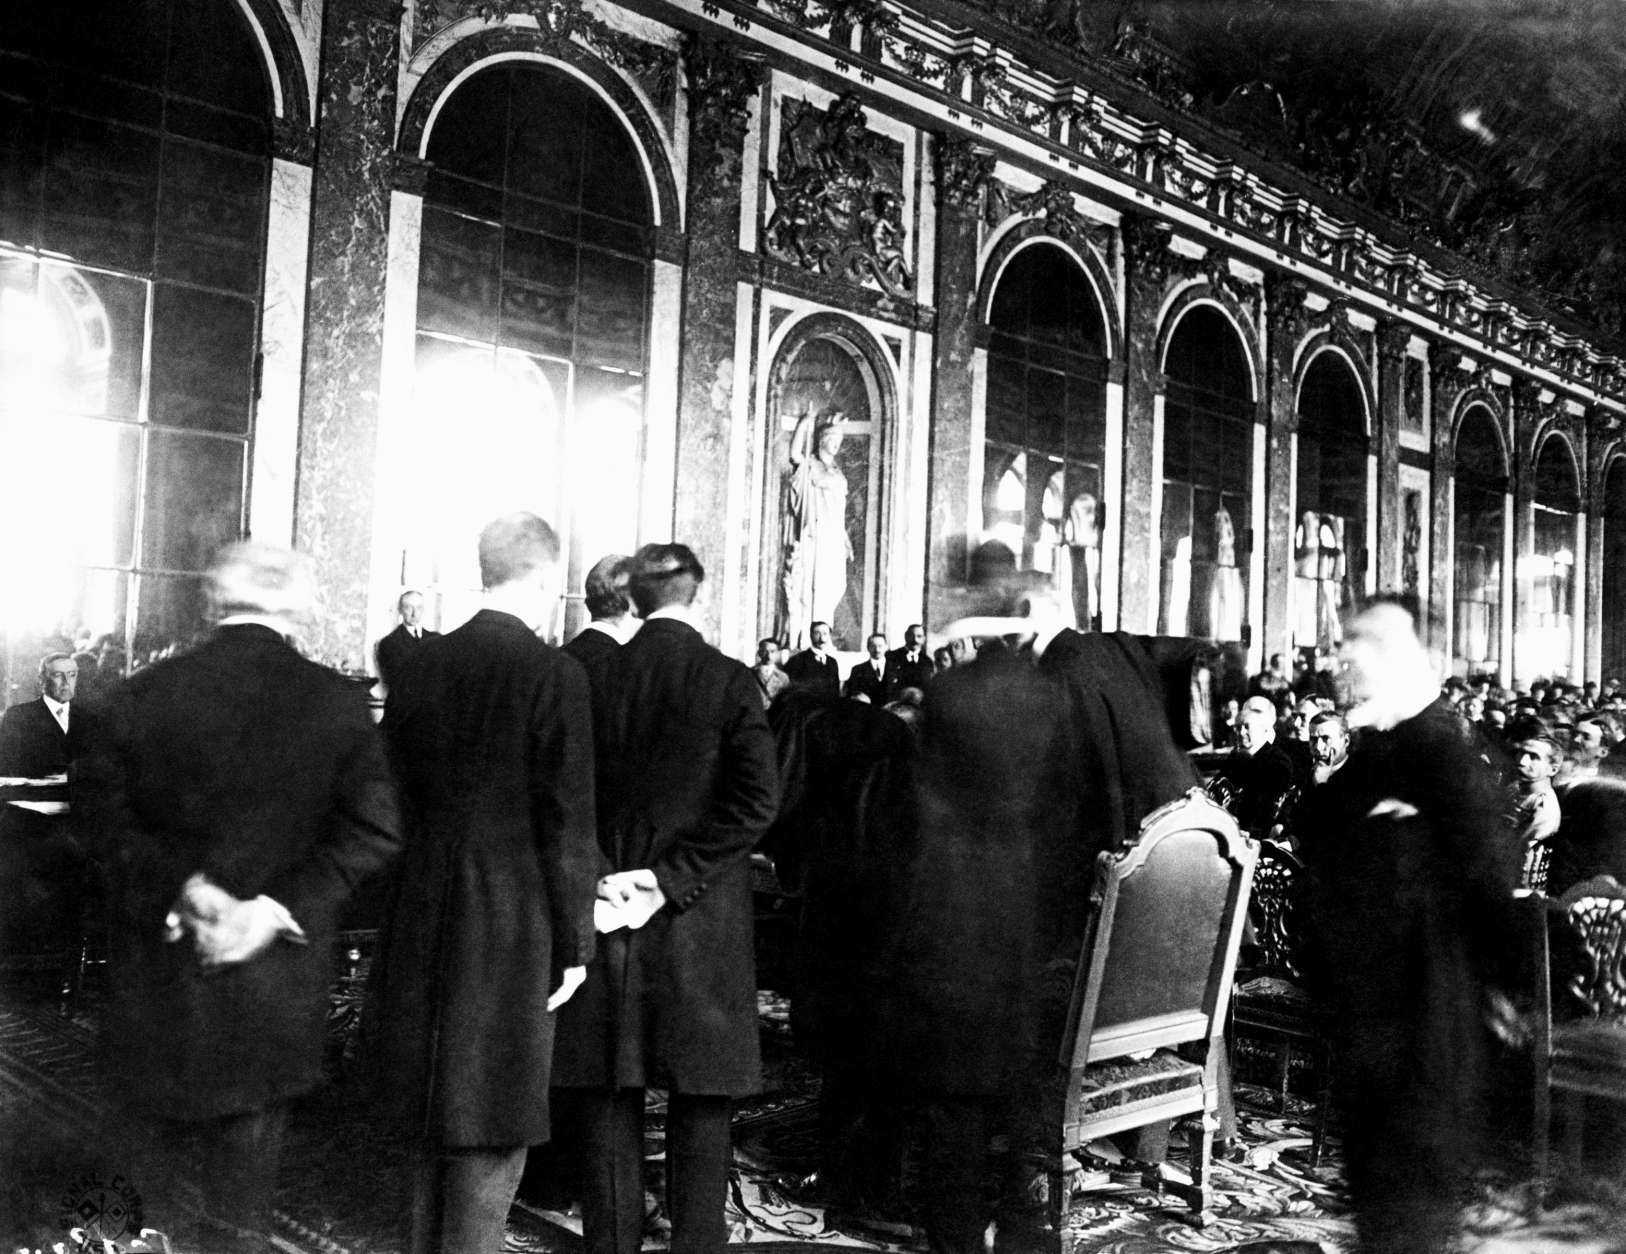 Treaty of Versailles, 1919 in France. (AP Photo)